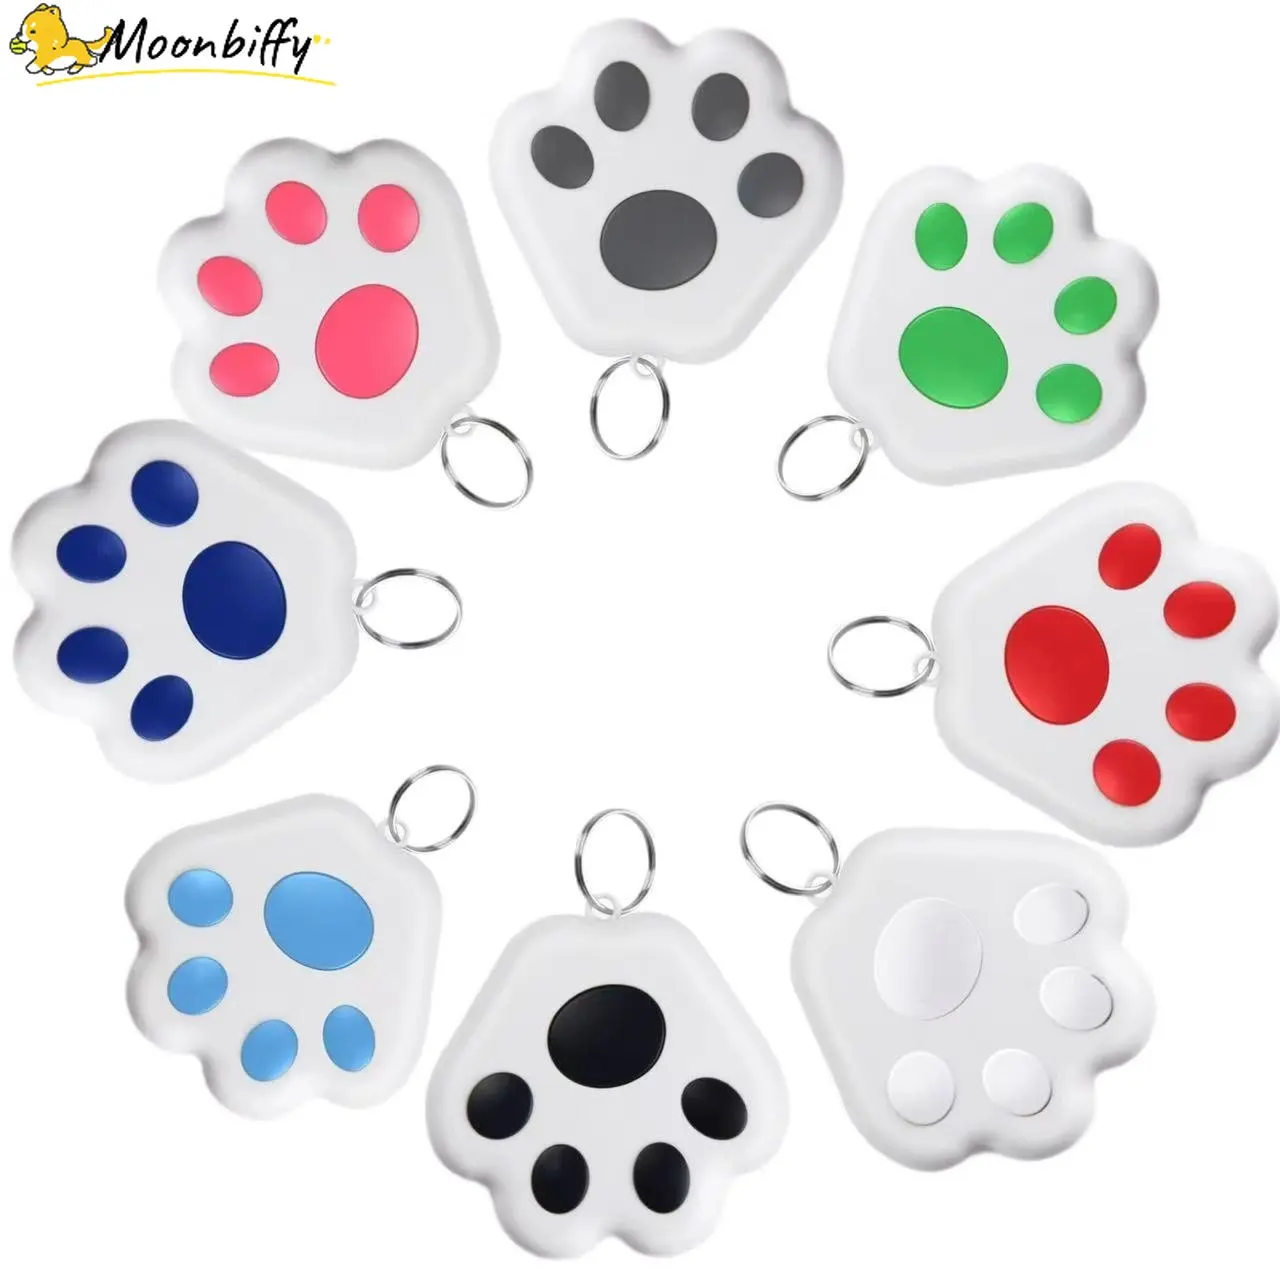 Pet Dog Anti-Lost GPS Tracking Locator Mini Bluetooth Device Accessories Prevention Waterproof Portable Wireless Tracker Tags